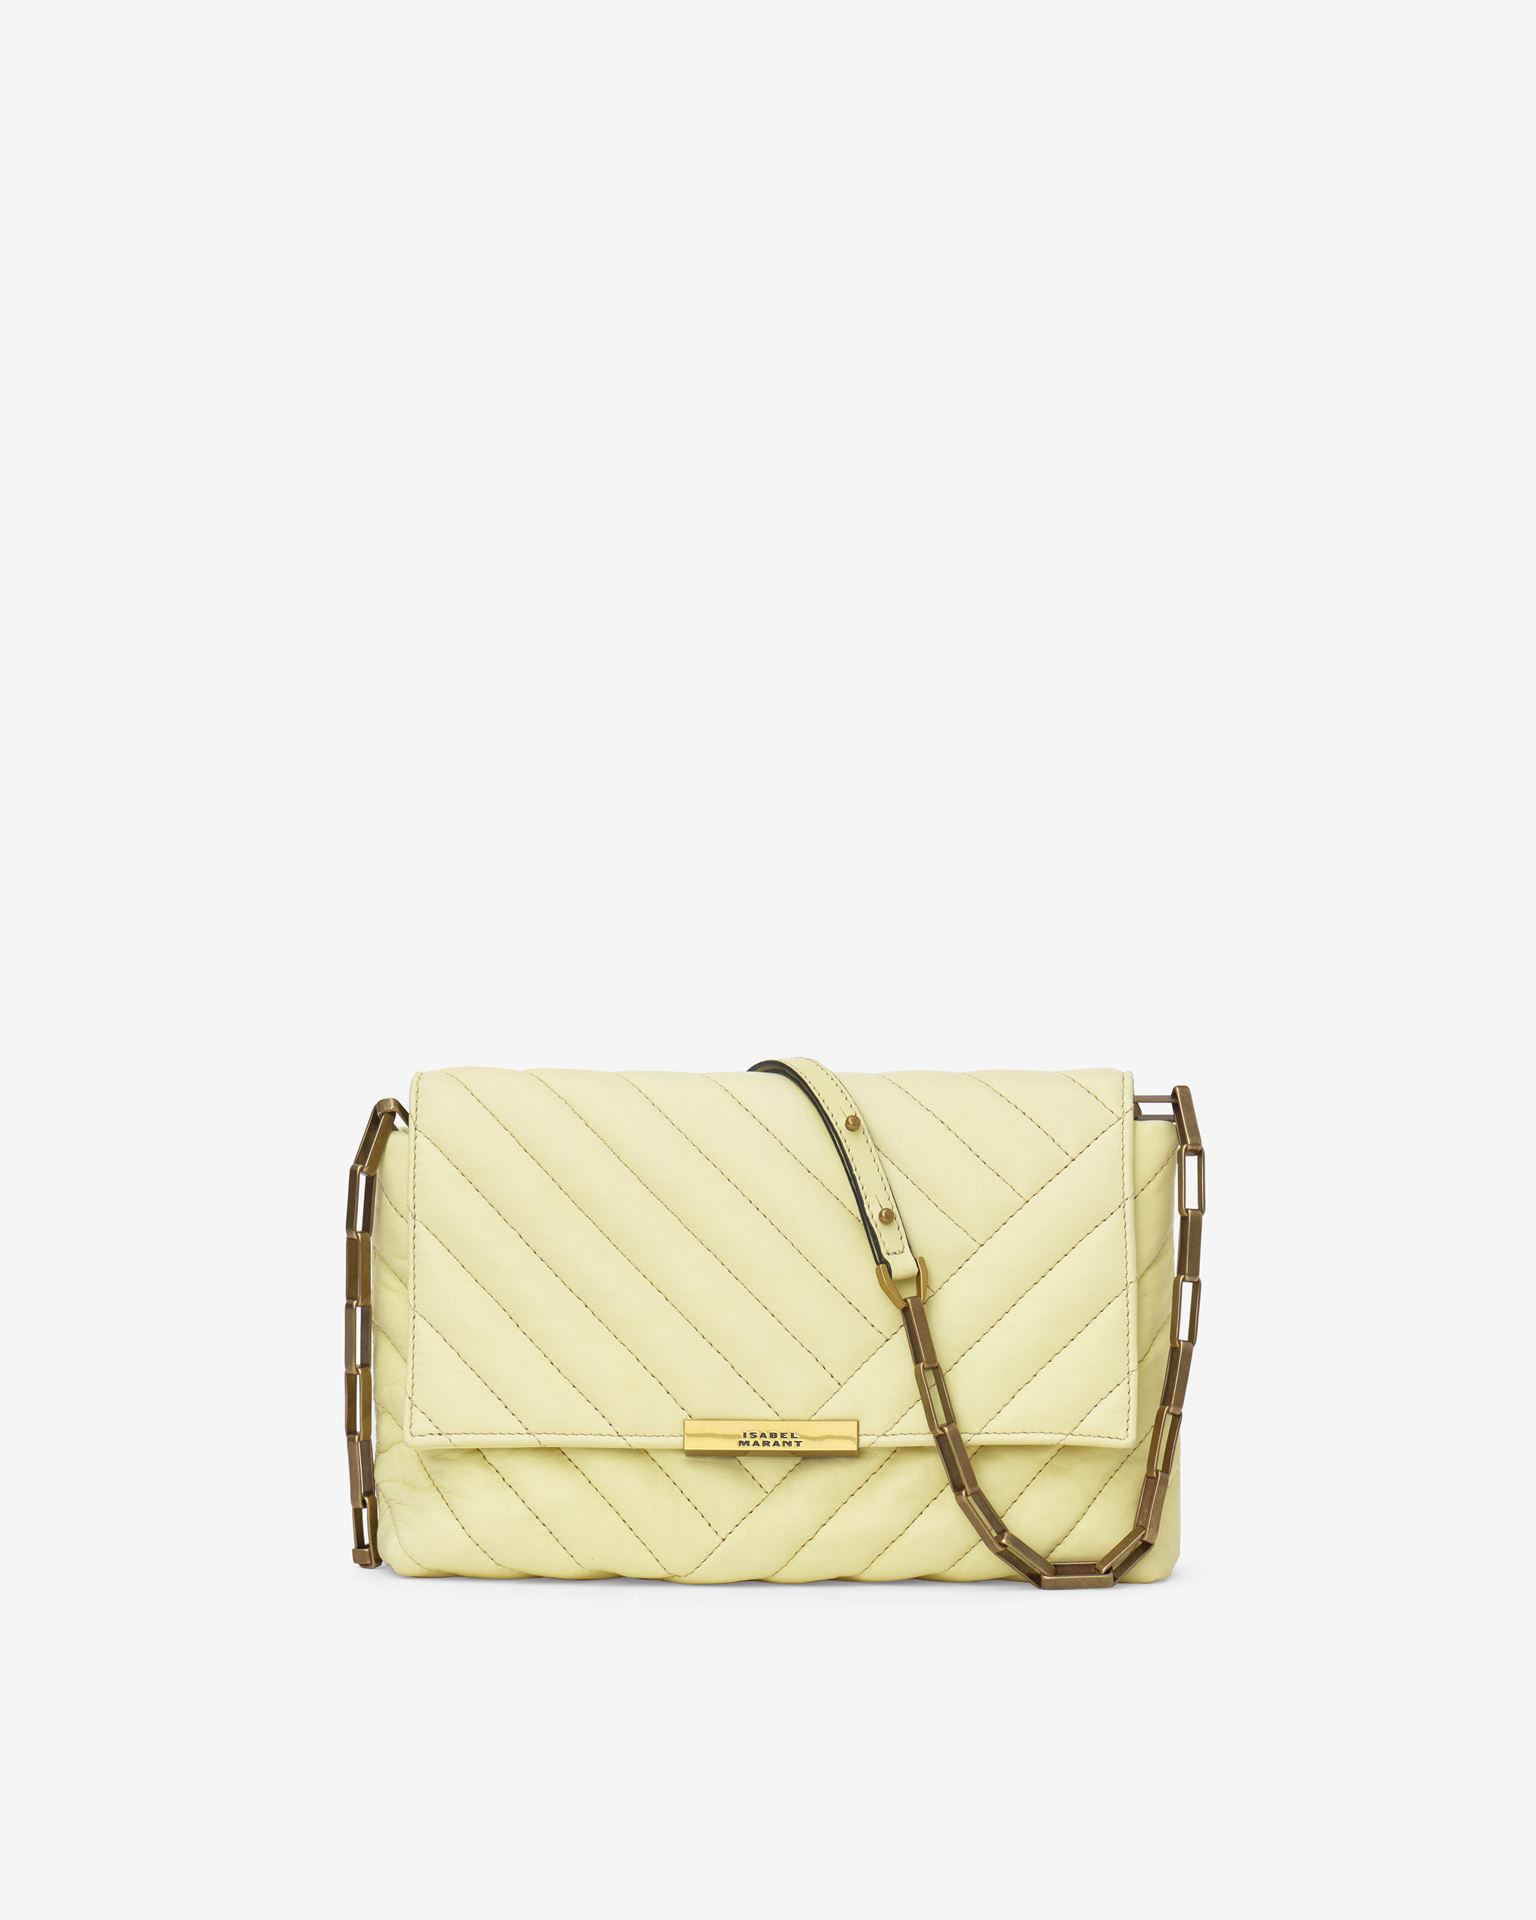 Isabel Marant, Merine Quilted Leather Bag - Women - Yellow